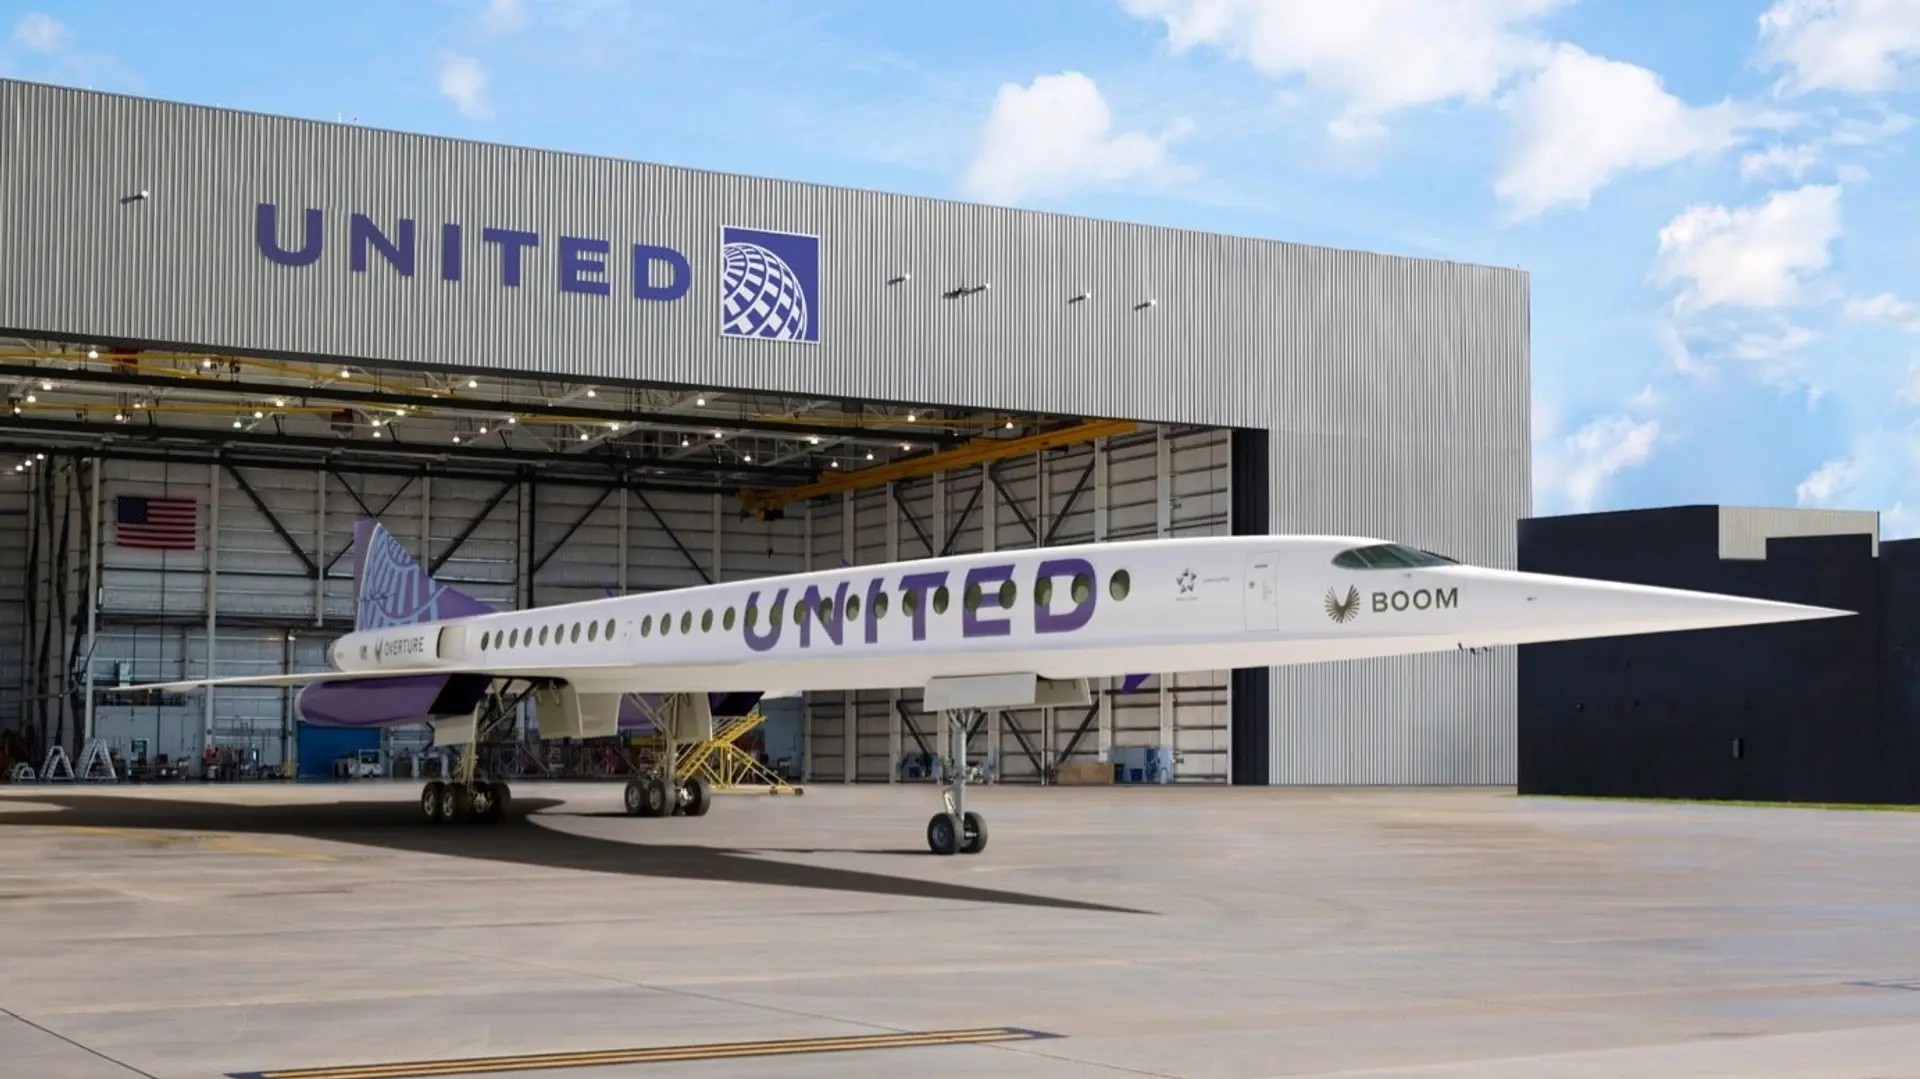 Airlines News - United Airlines goes supersonic